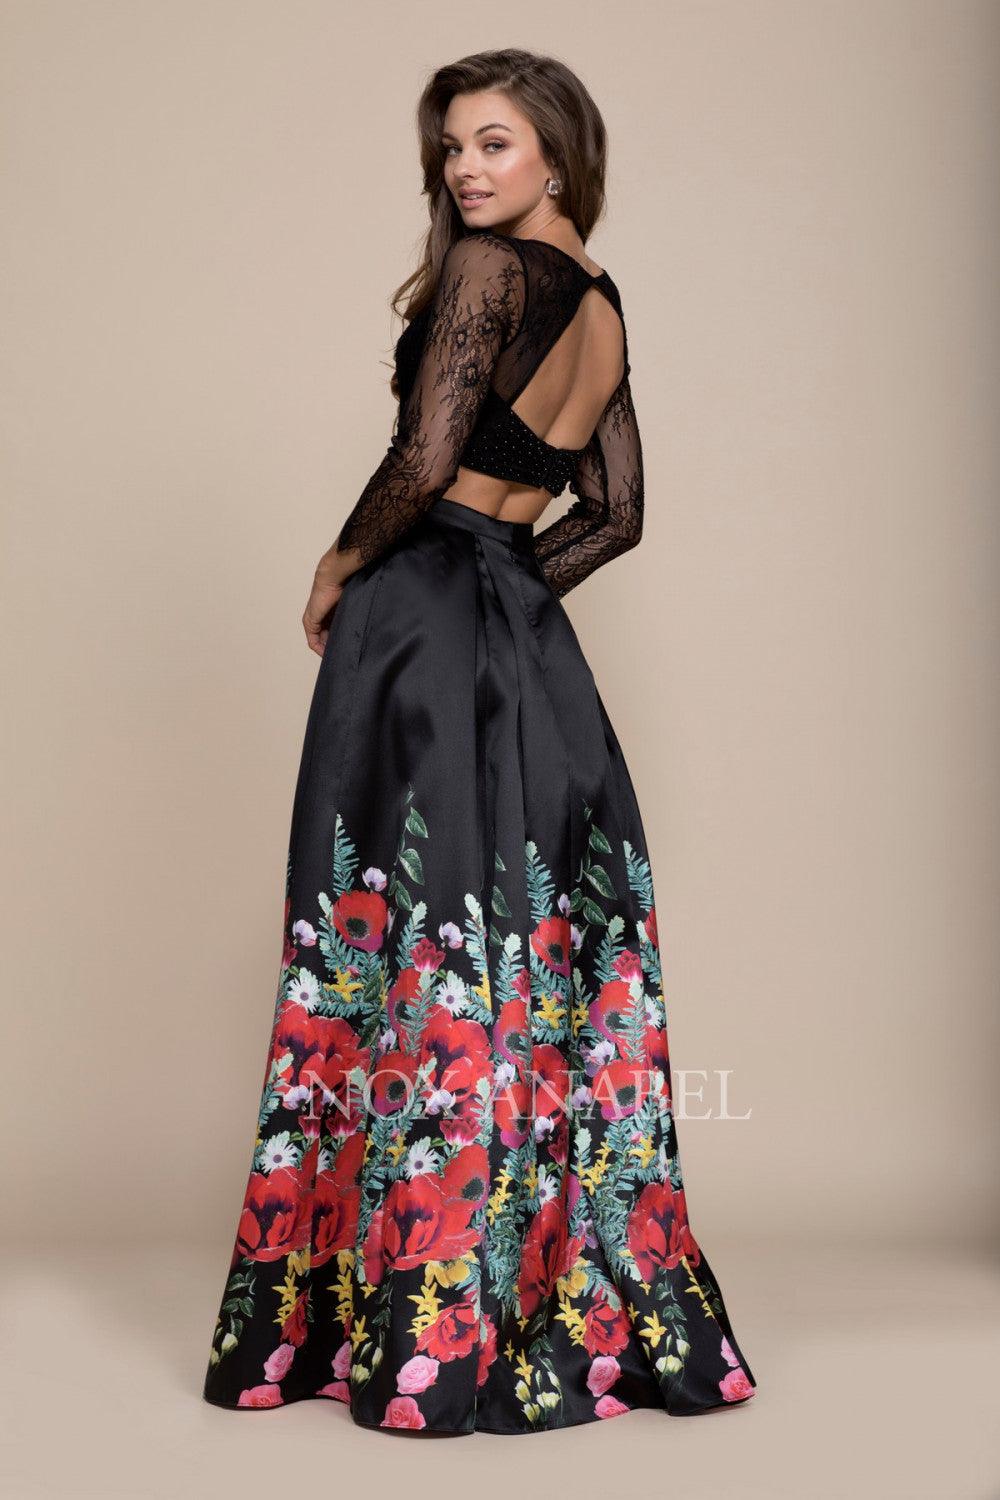 Long Two Piece Lace Crop Top Prom Dress - The Dress Outlet Nox Anabel